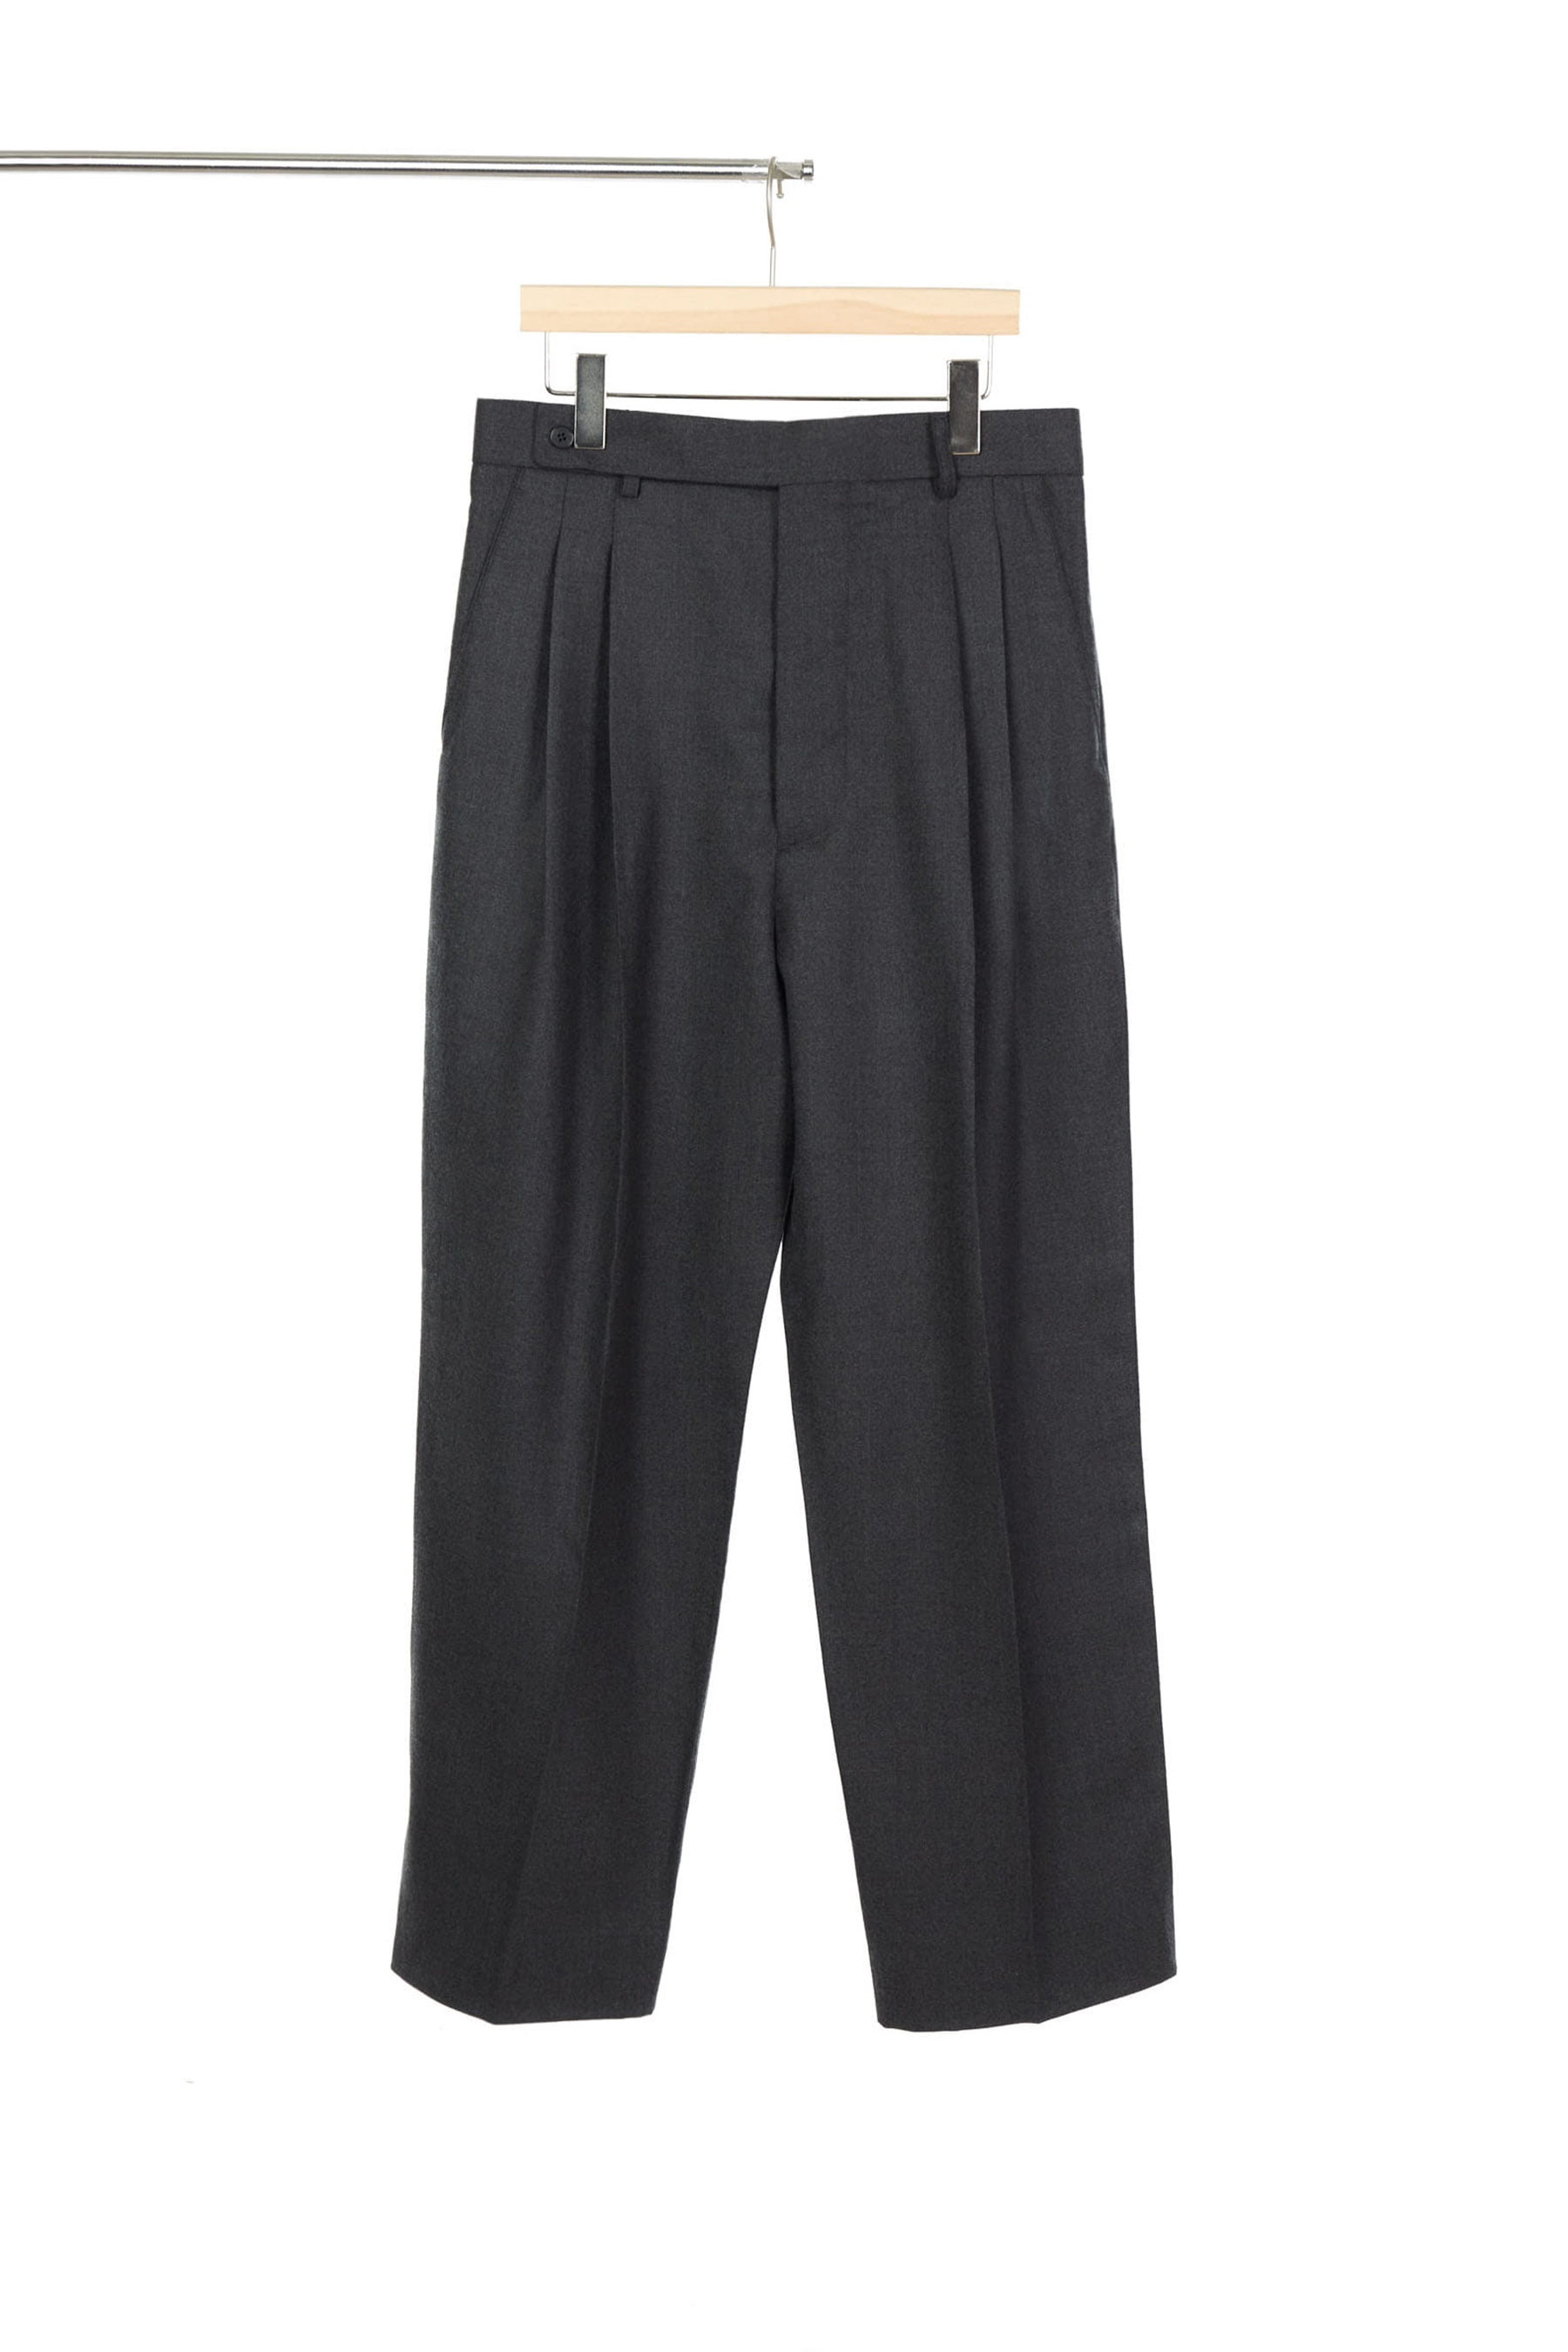 CHARCOAL TWO-TUCK WIDE FLANNEL PANTS 01